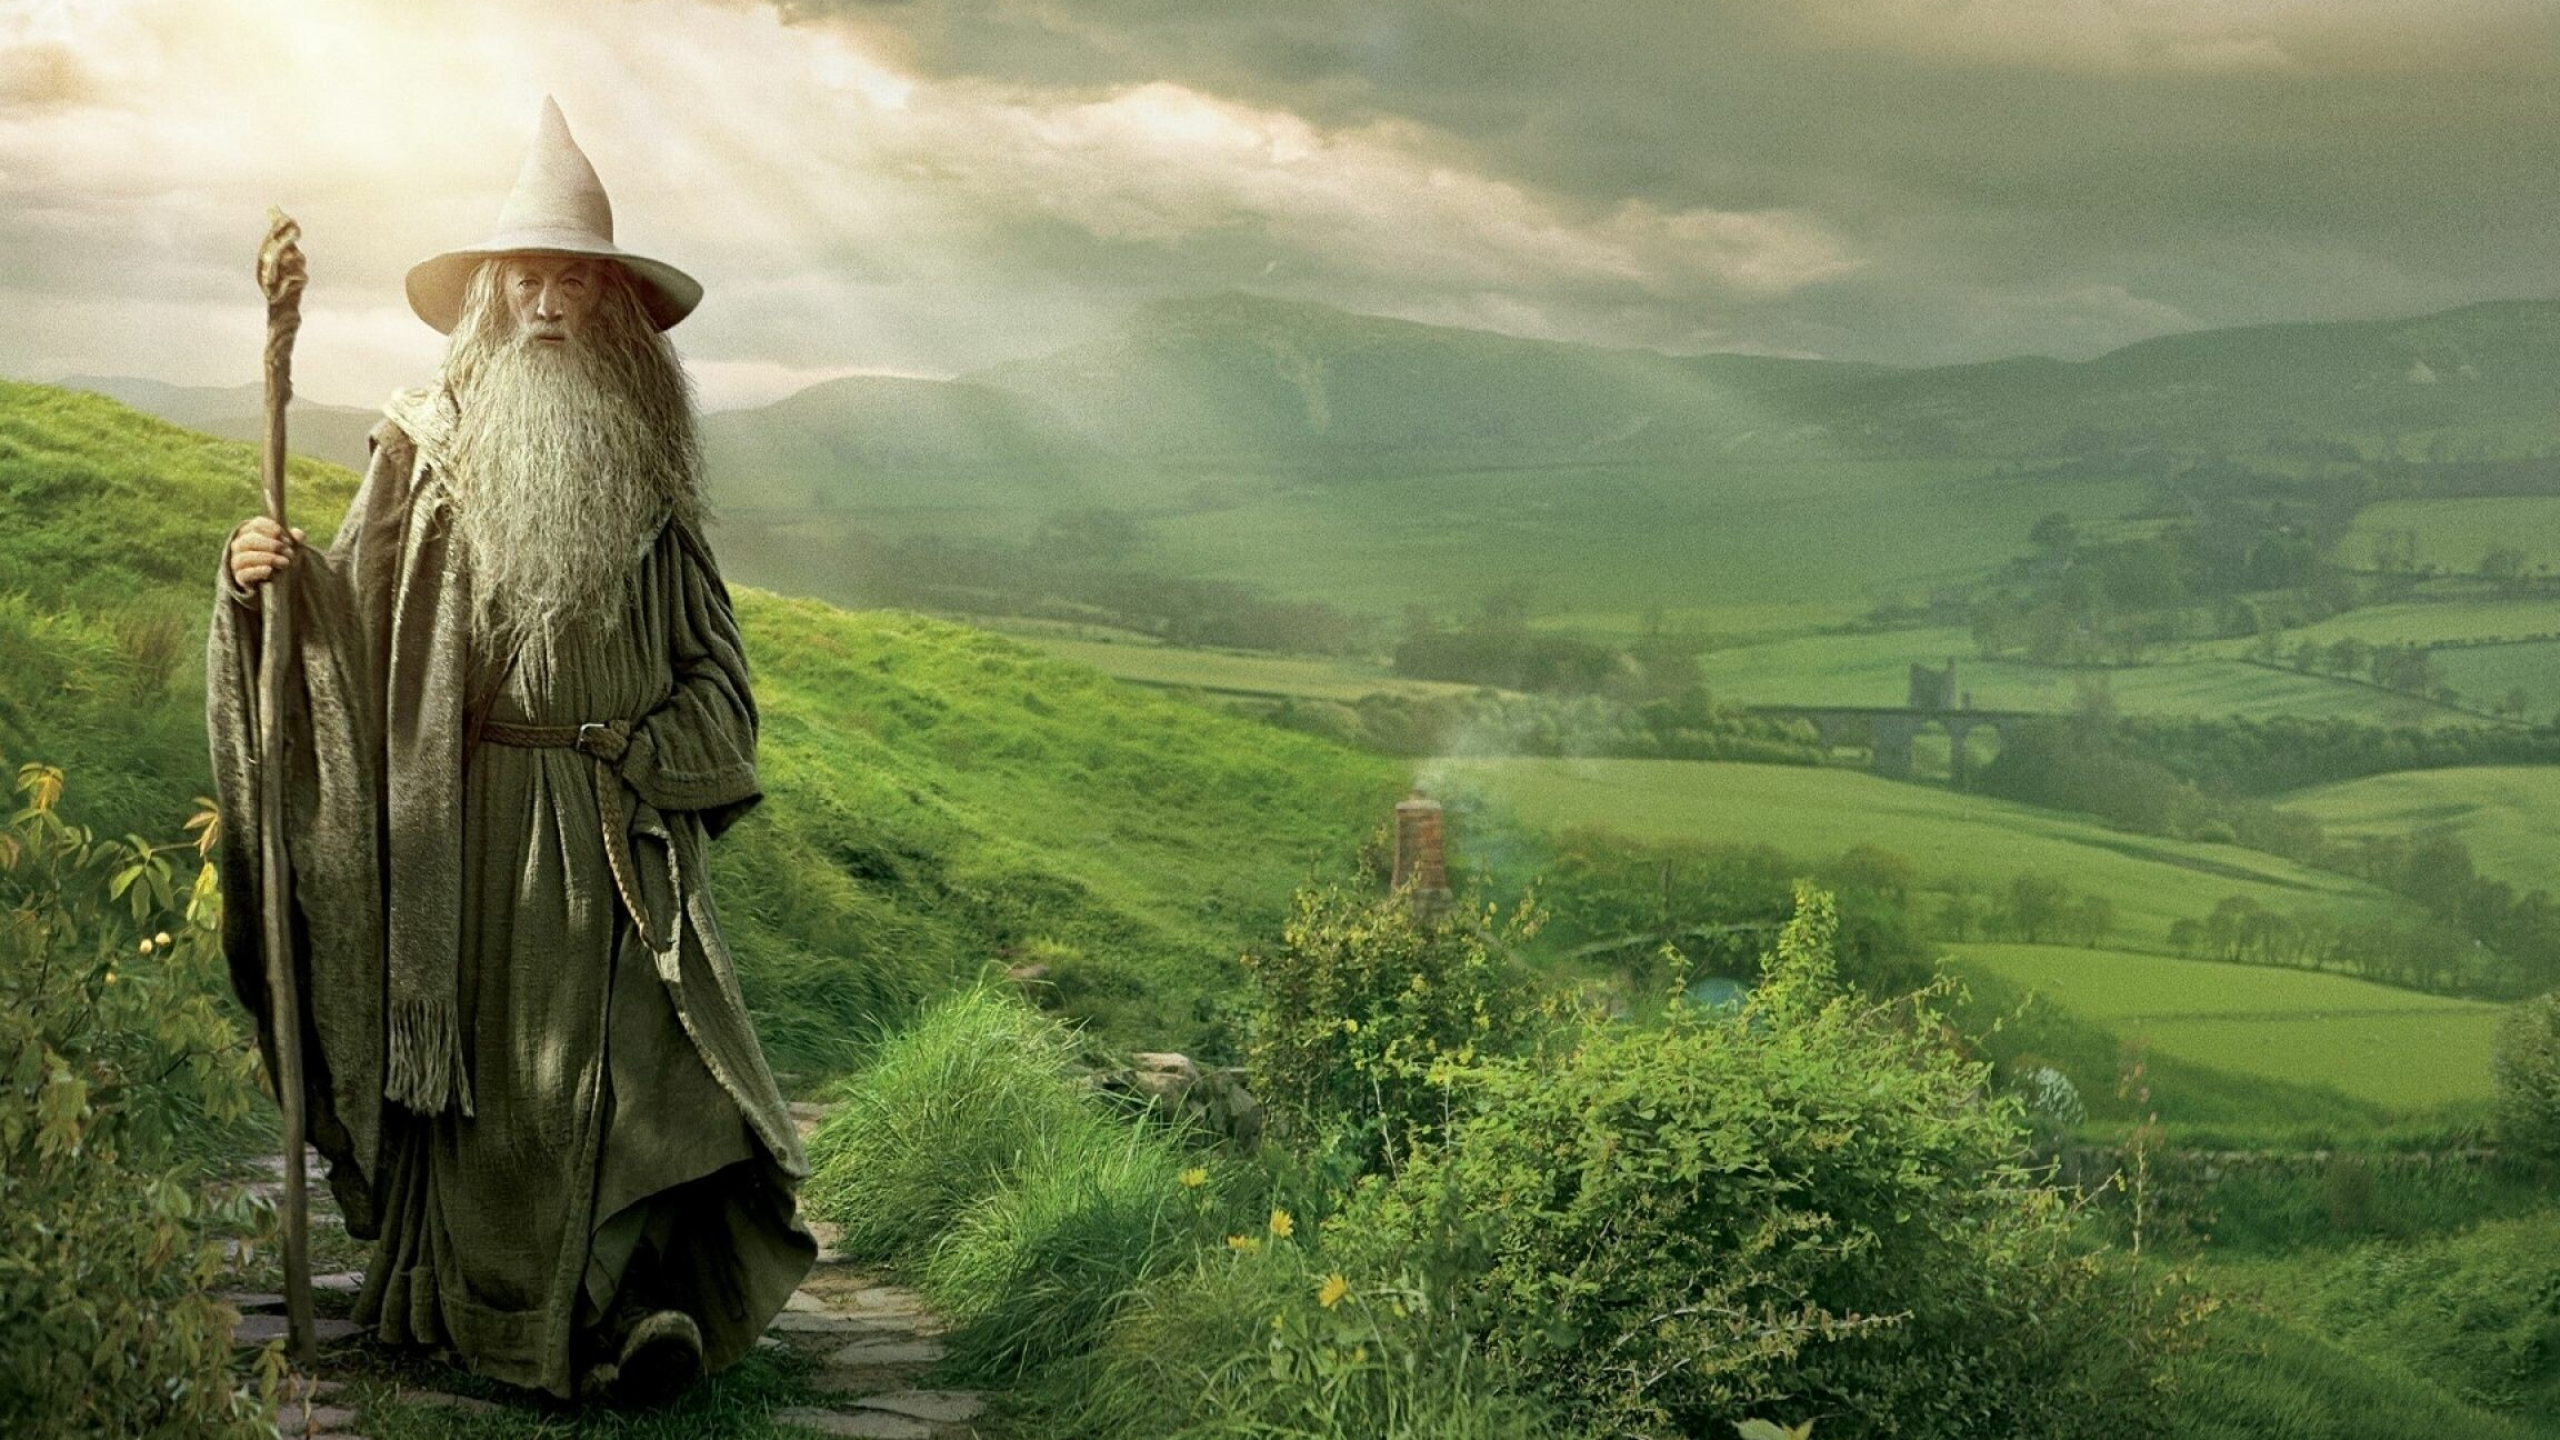 The Lord of the Rings: Gandalf, Assists the 13 dwarves and the hobbit Bilbo Baggins with their quest to retake the Lonely Mountain. 2560x1440 HD Wallpaper.